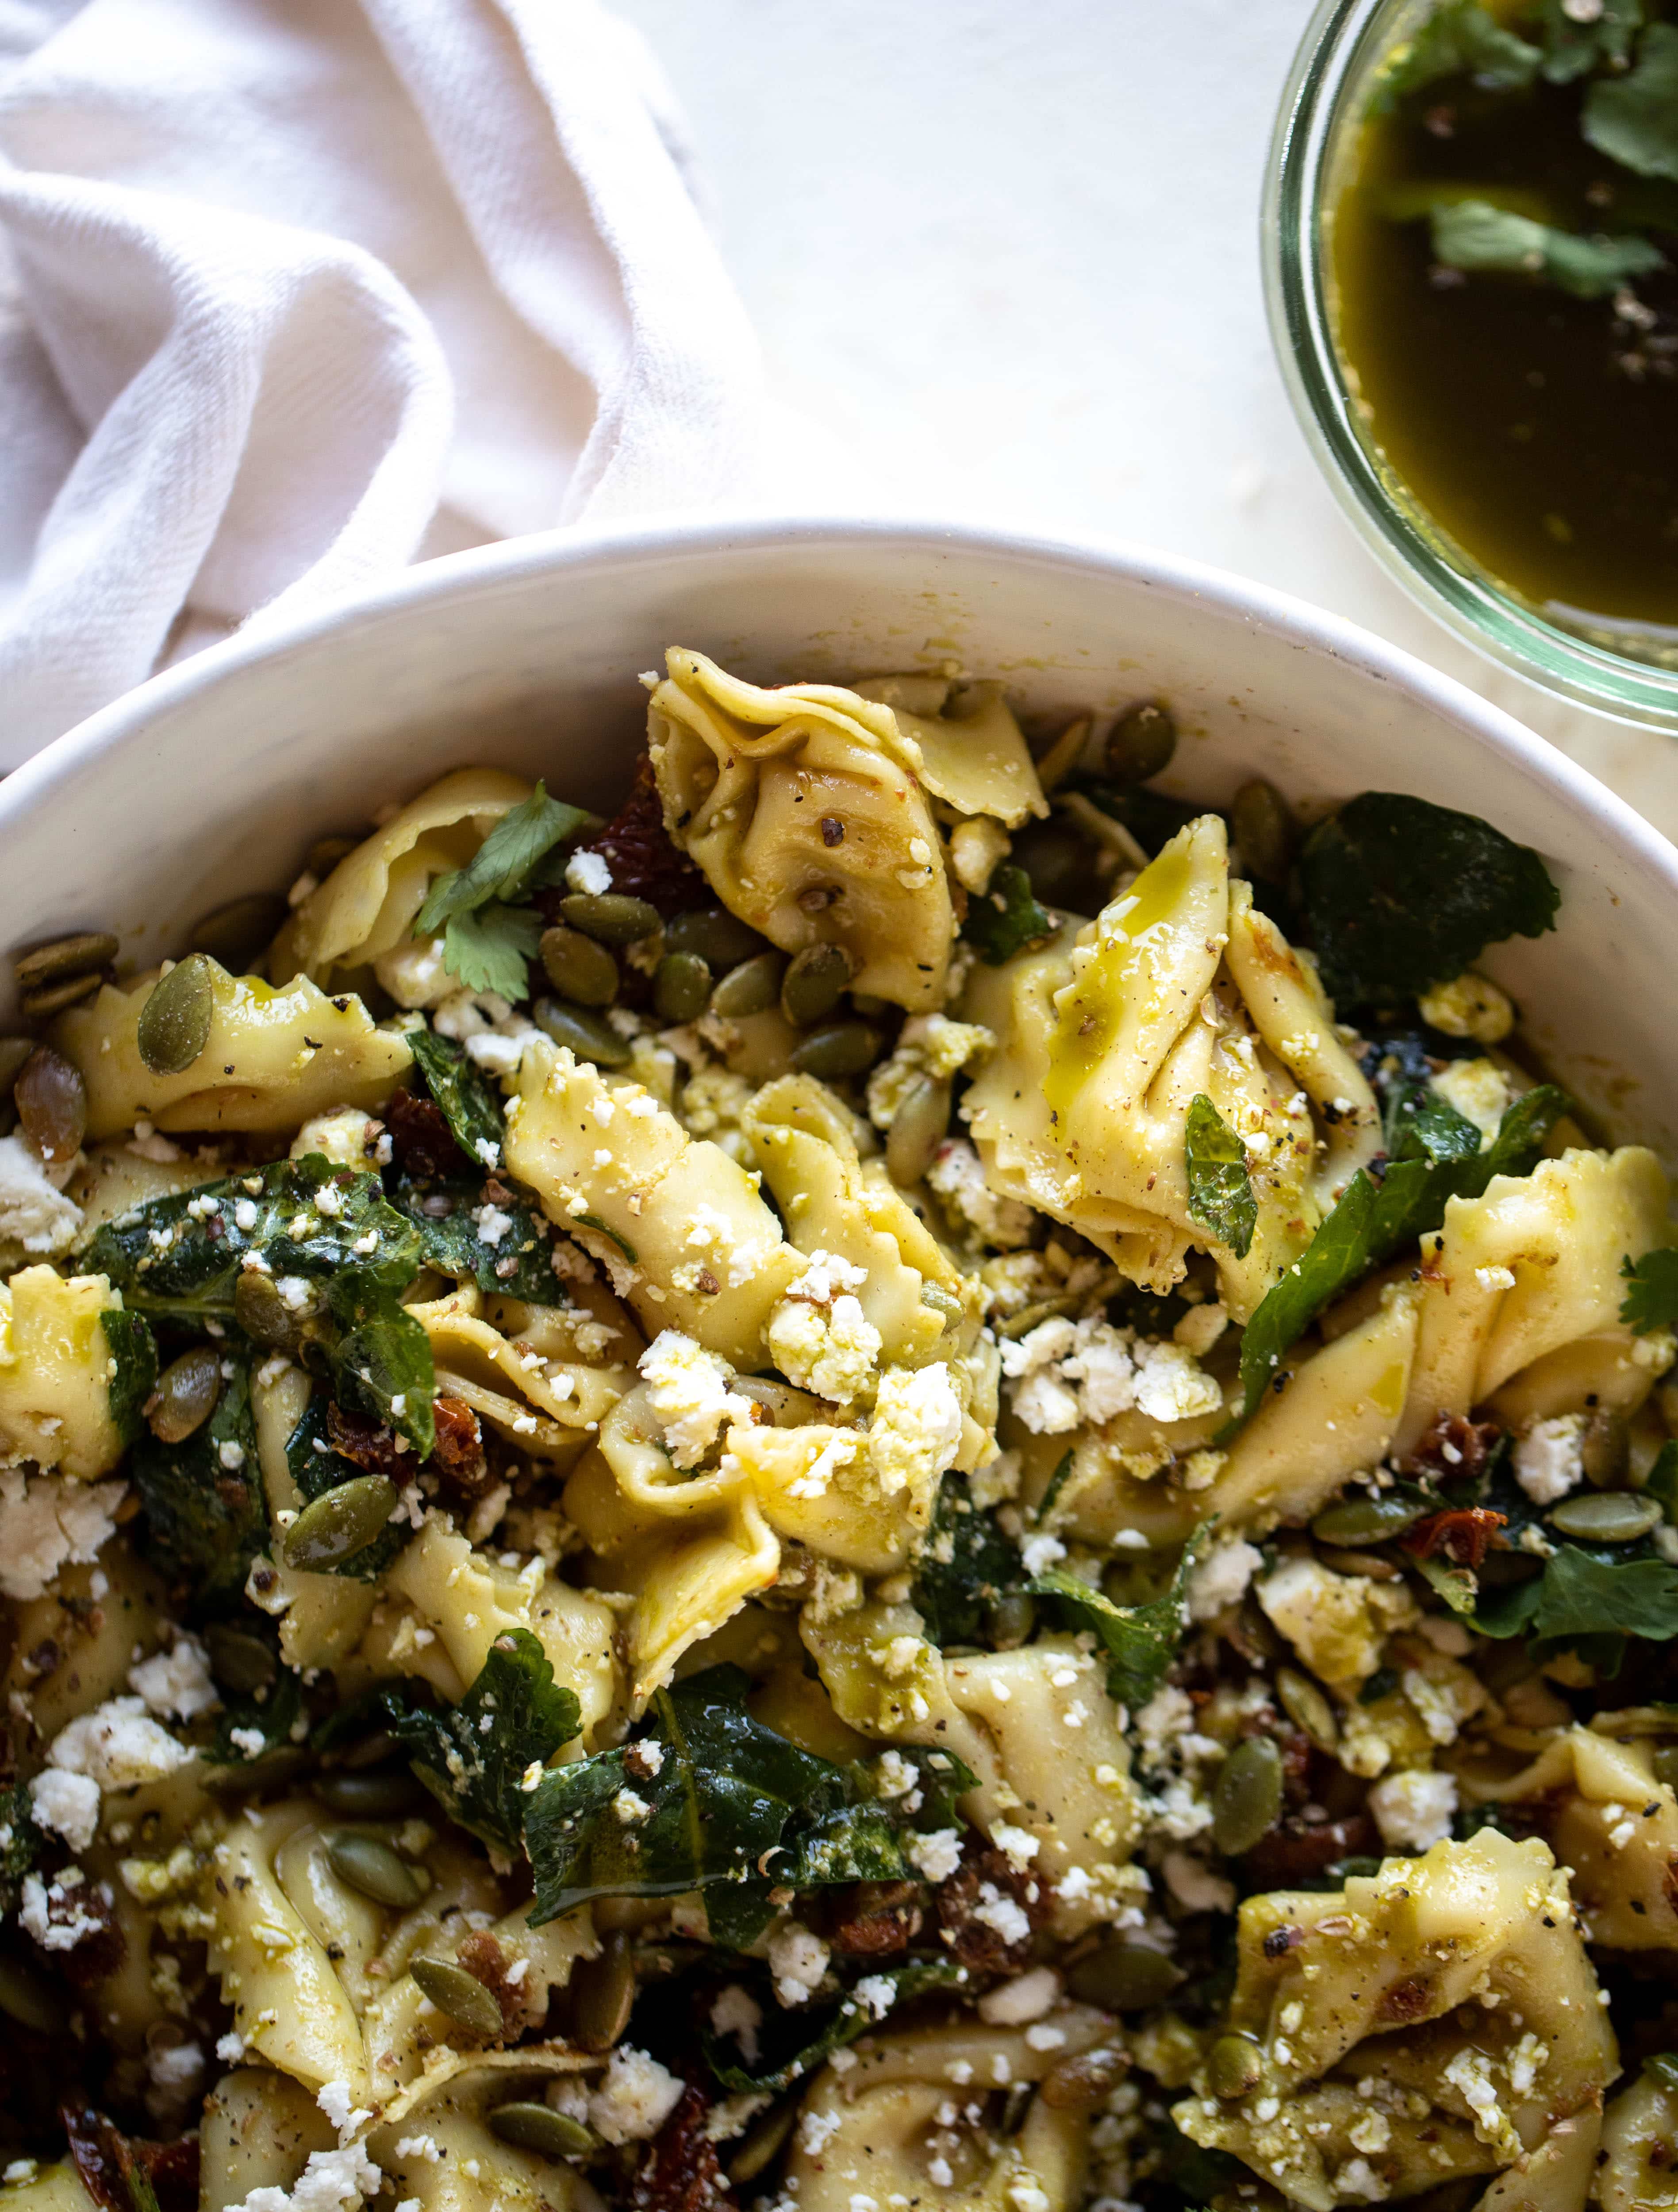 This cilantro lime tortellini salad is loaded with flavor! Served warm or cold, it has pepitas, sun dried tomatoes and crumbled feta. It's ridiculously good! 